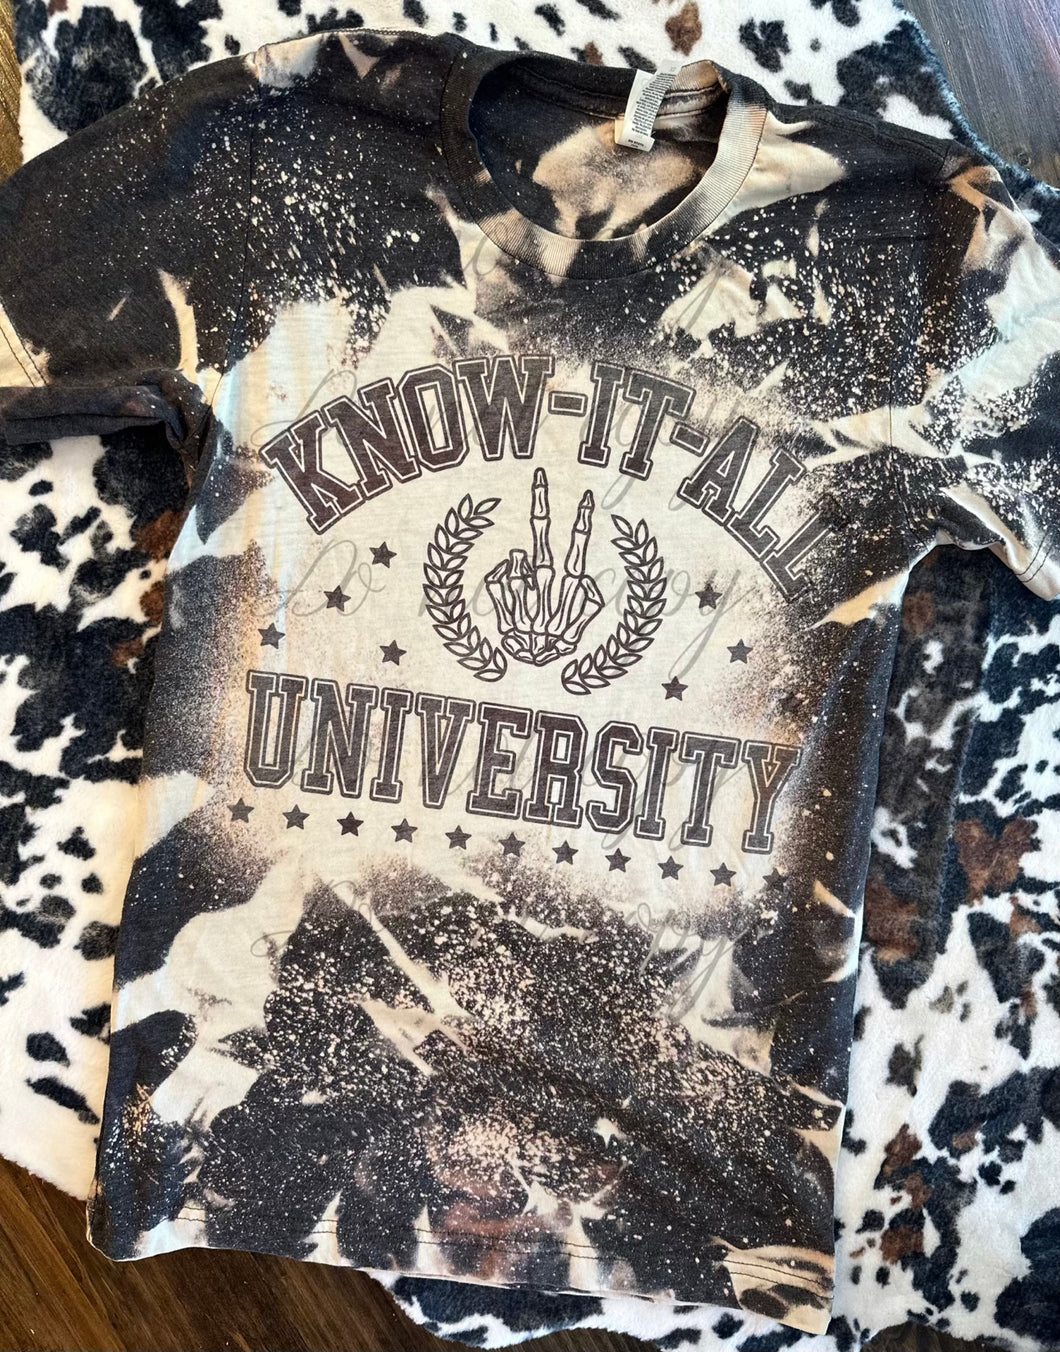 Bleached Know-it-all university graphic tee or sweatshirt graphic tee or sweatshirt - Mavictoria Designs Hot Press Express